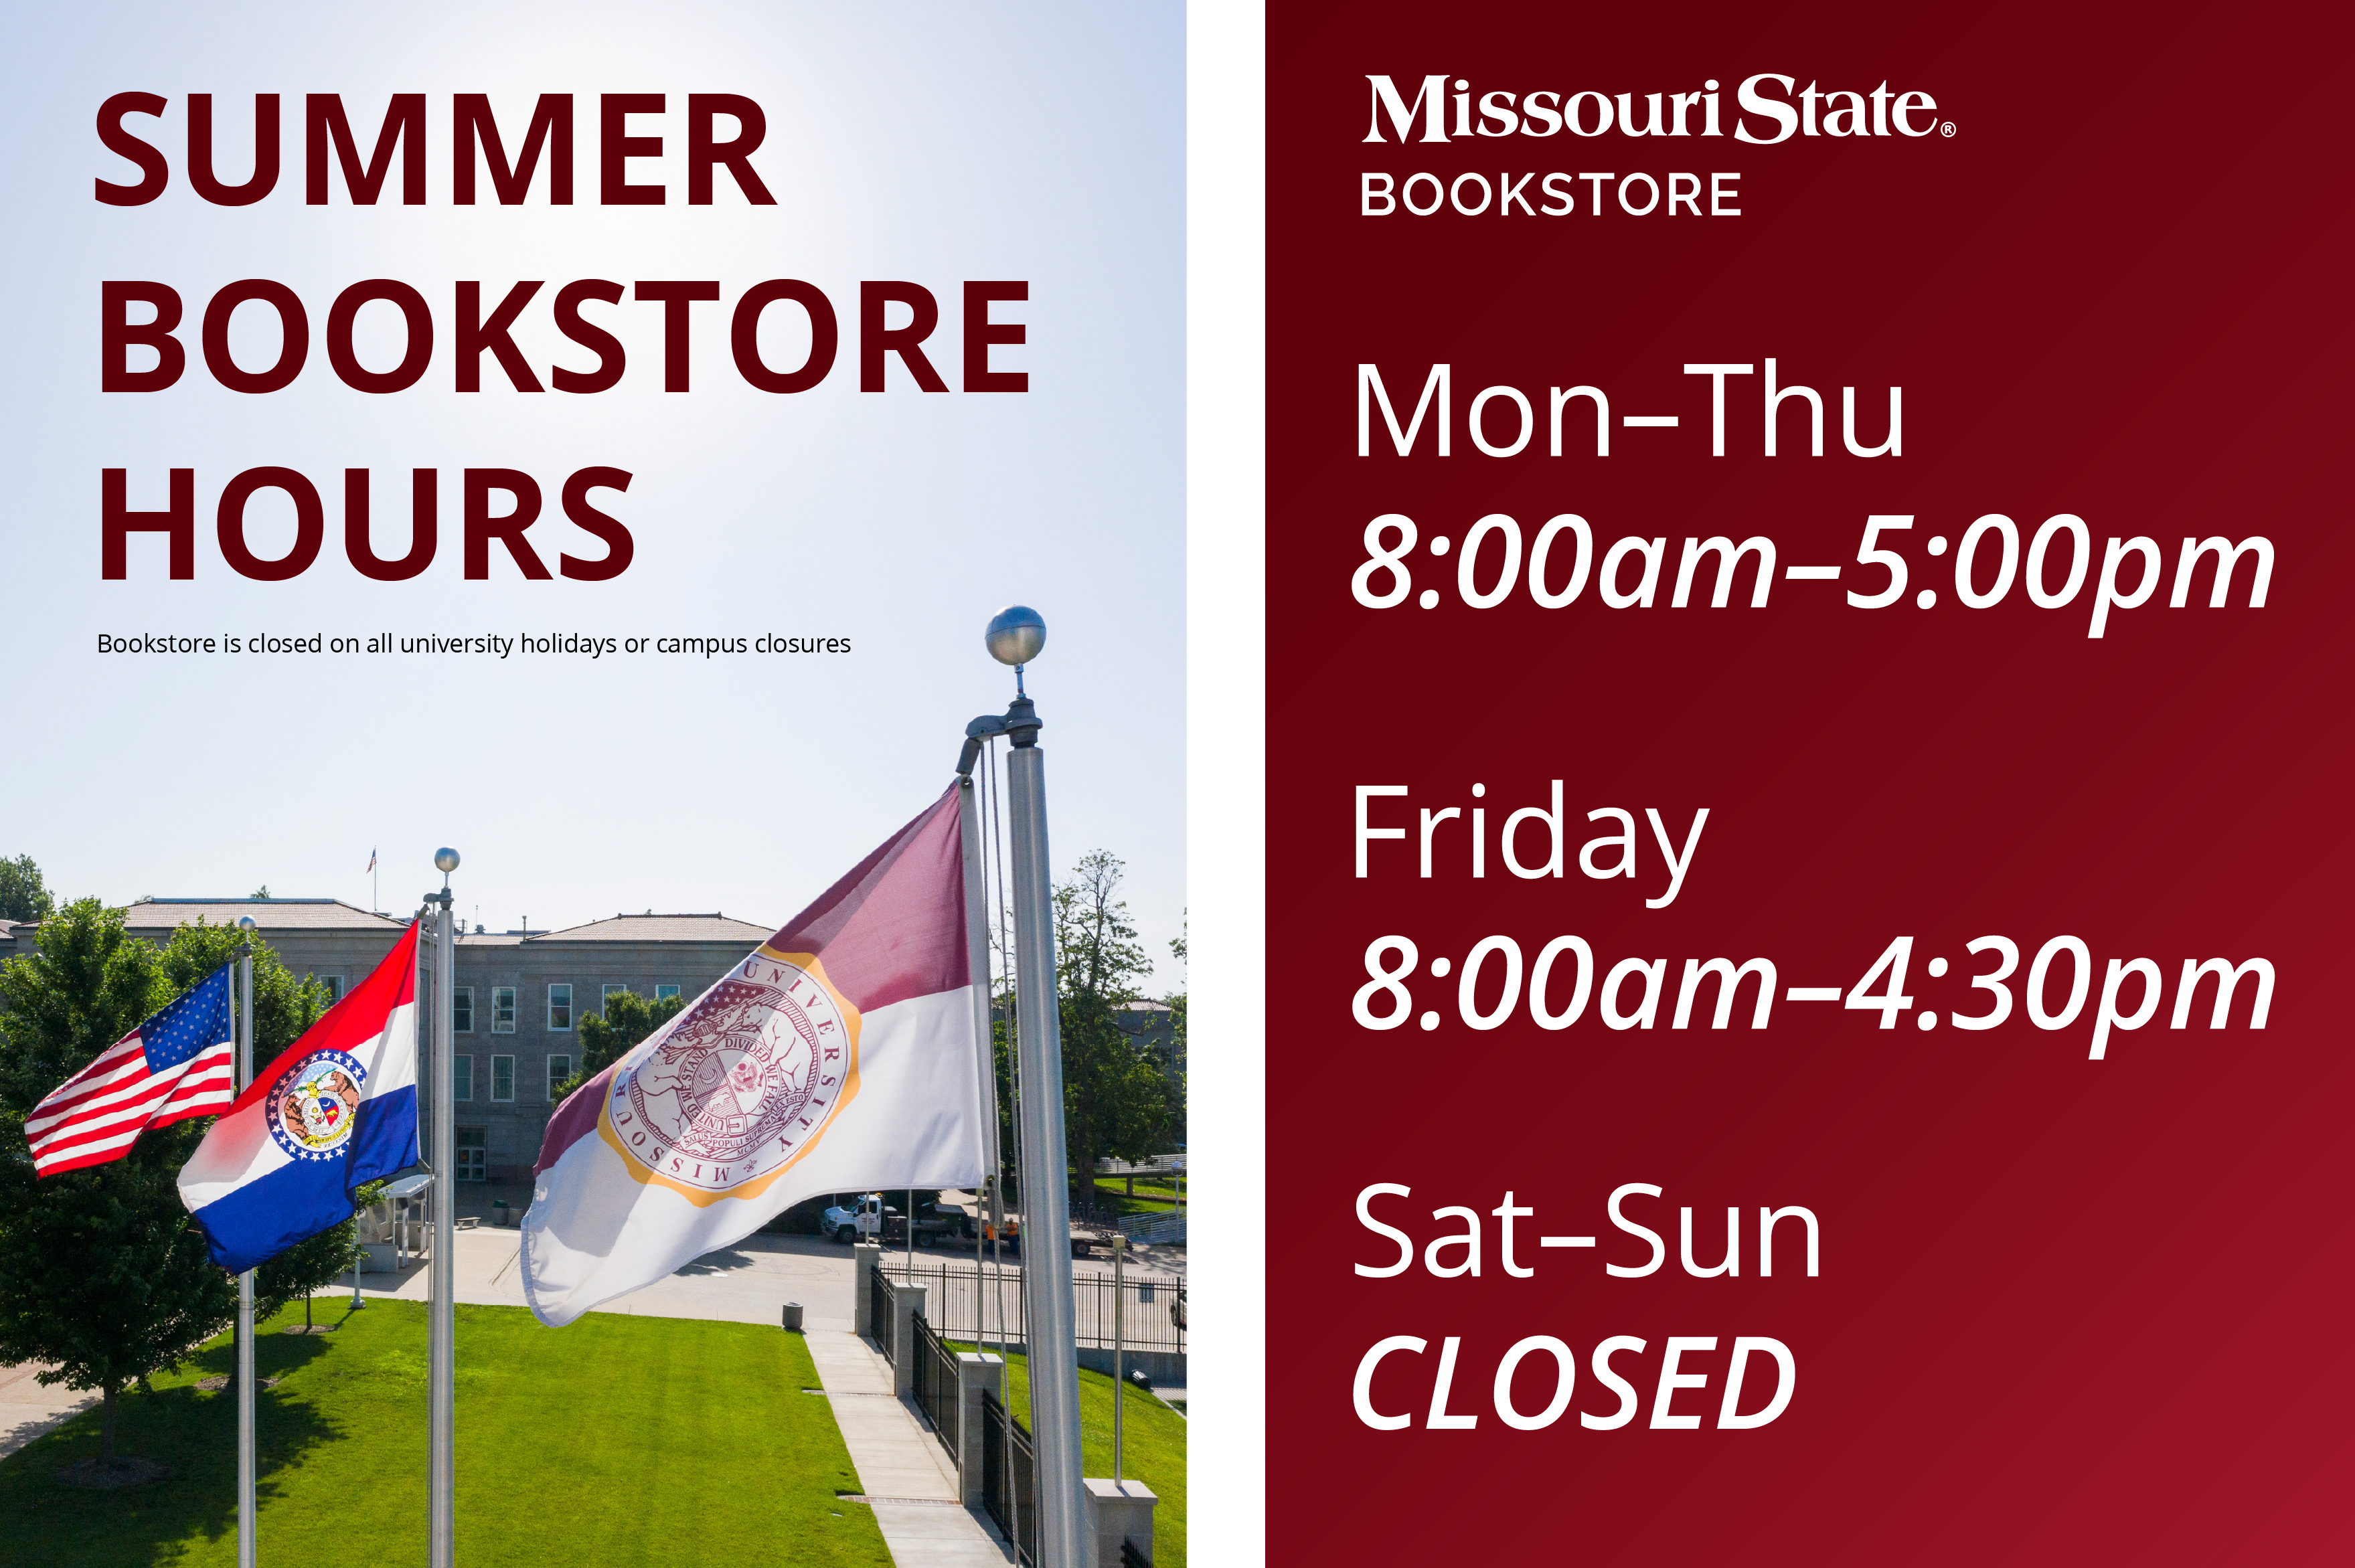 Summer Bookstore Hours, Monday - Thursday 8:00 am - 5:00 pm, Friday 8:00 am - 4:30 pm, Saturday and Sunday Closeed, Bookstore is closed on all university holidays or campus-wide closures.